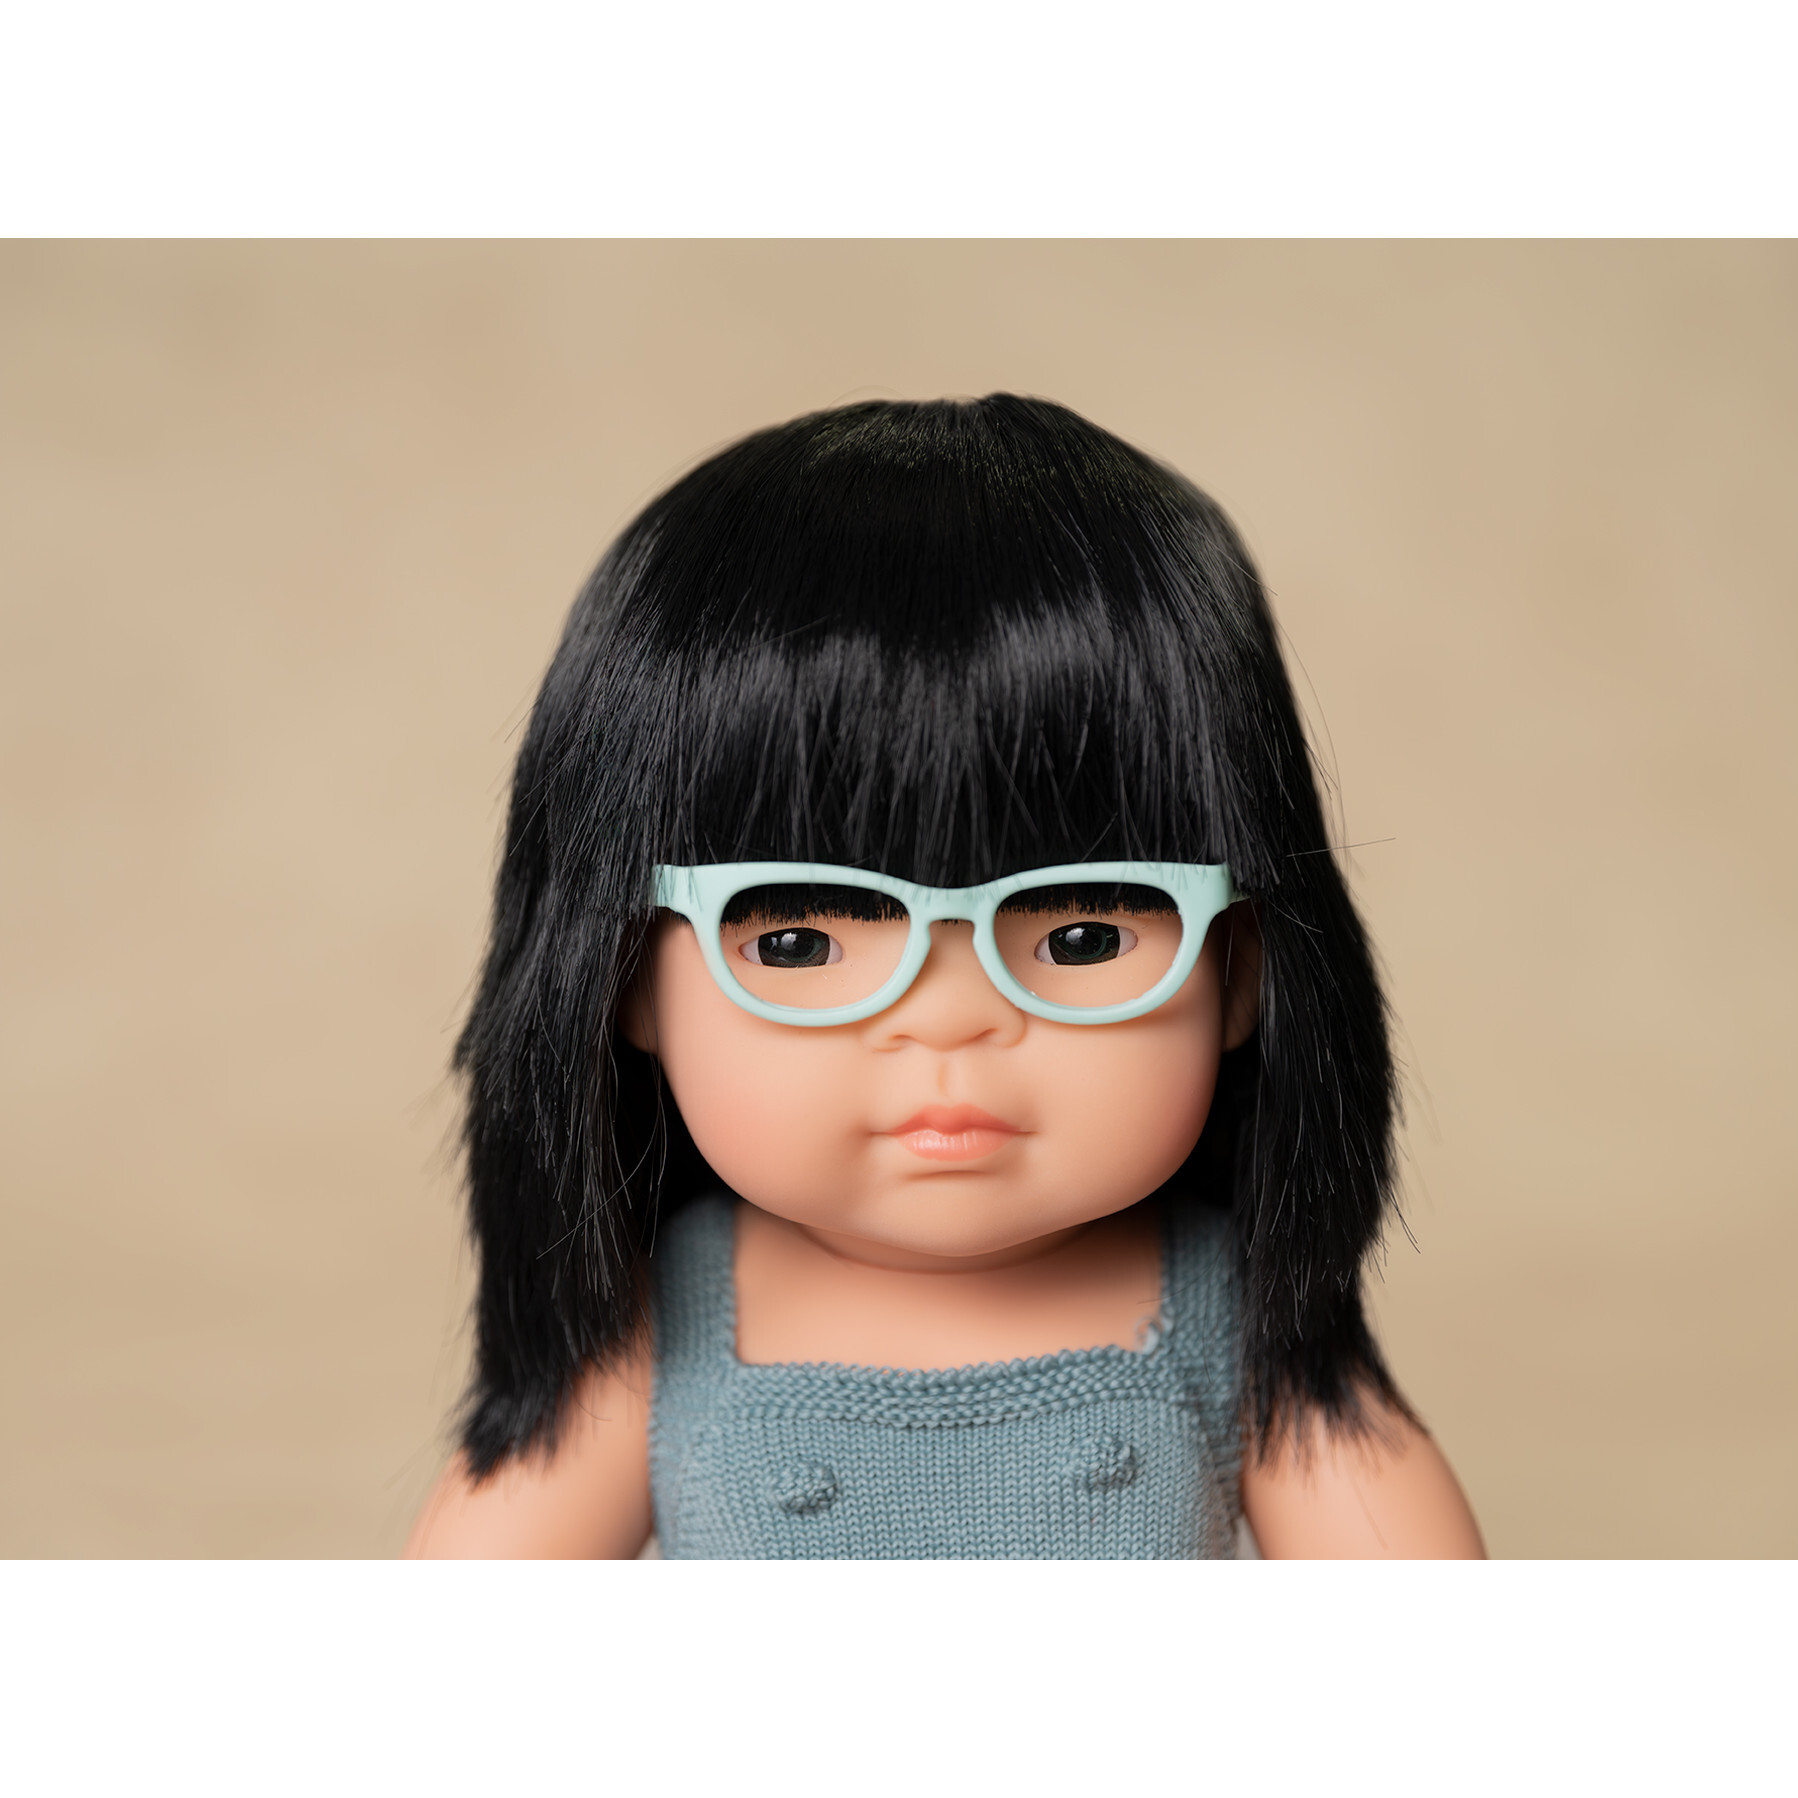 Miniland – Colorful Doll Asian Girl with Glasses 15